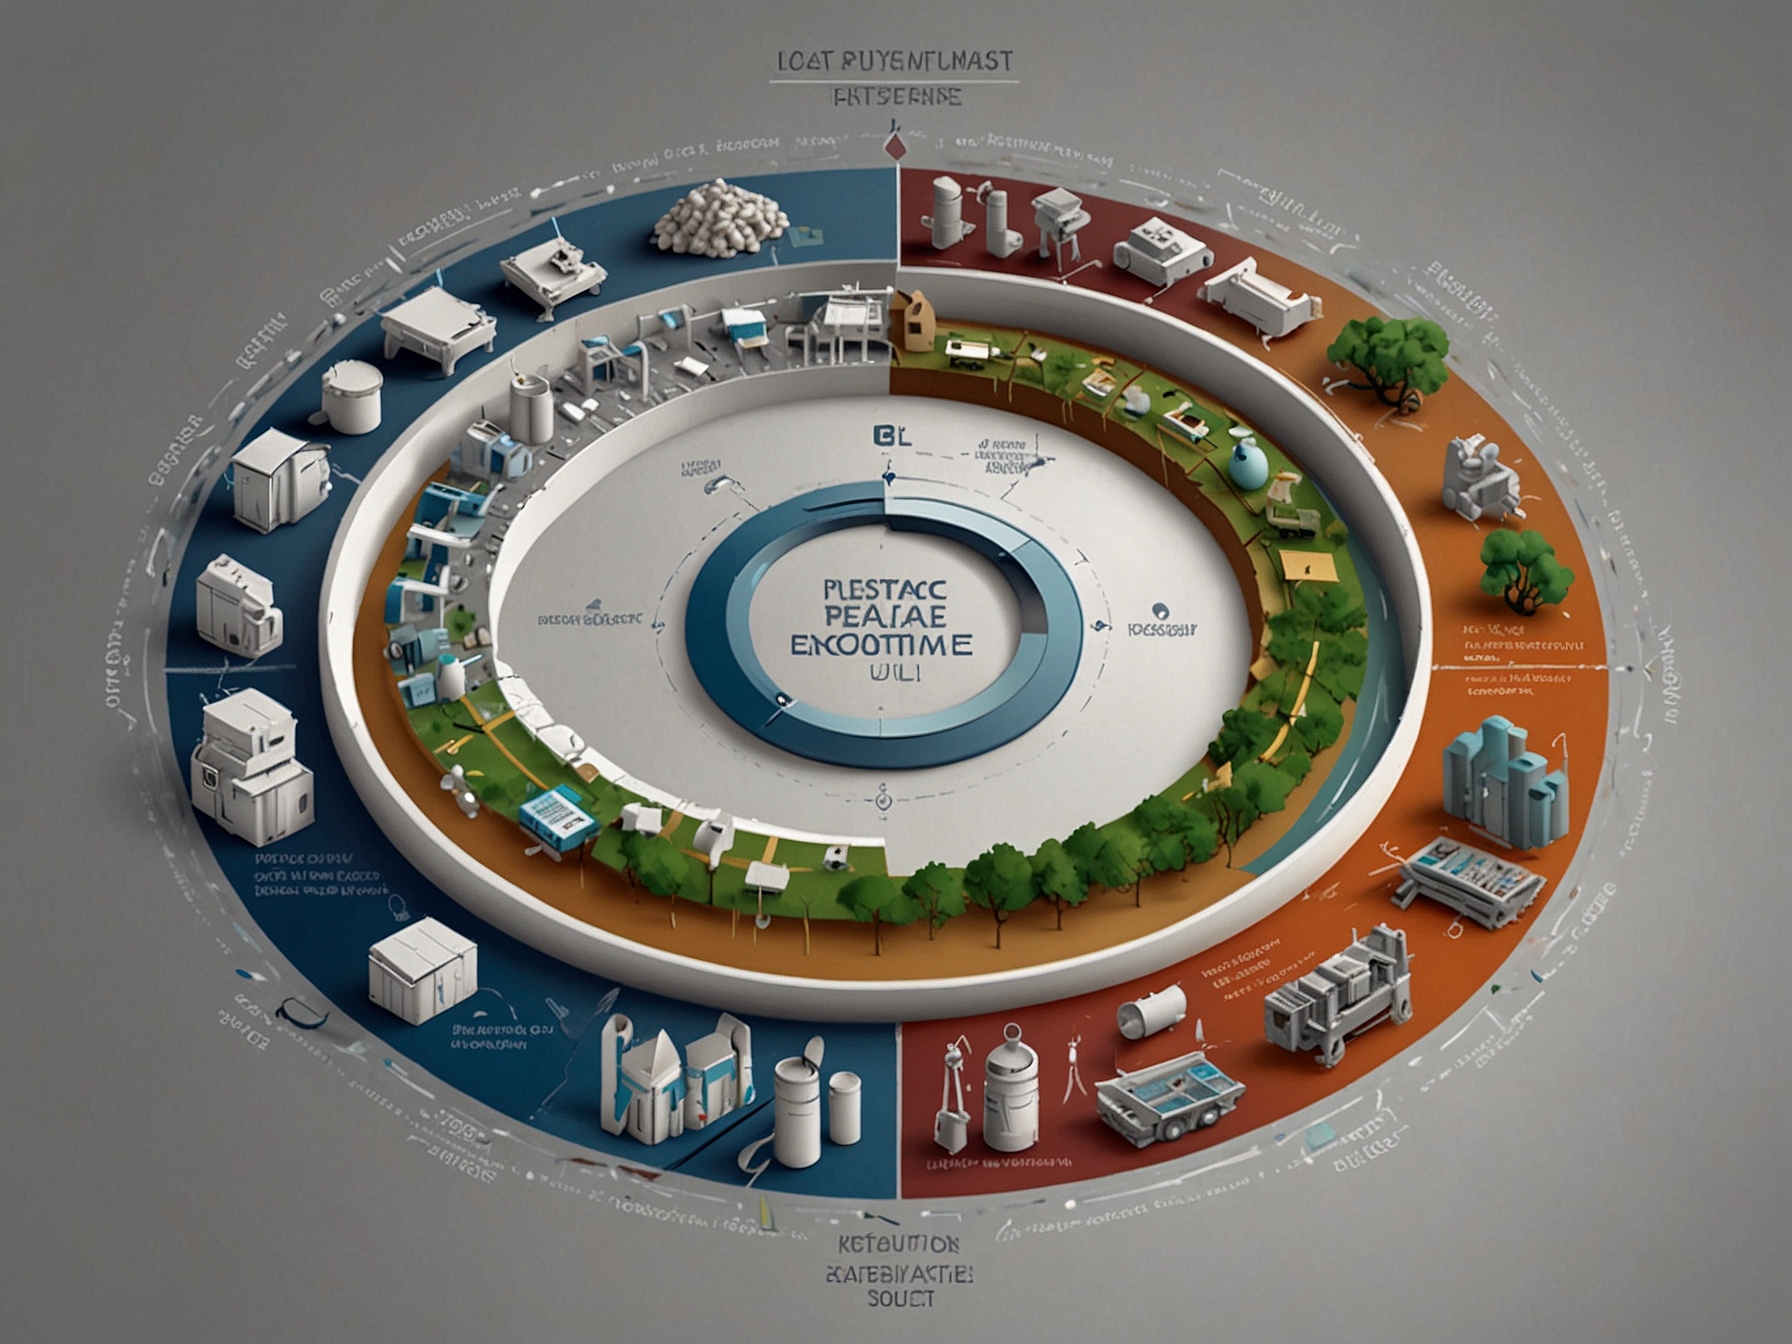 A diagram depicting the concept of a circular economy, highlighting the stages of design, manufacturing, use, and recycling of plastic products to illustrate the industry's vision of sustainable plastic management.